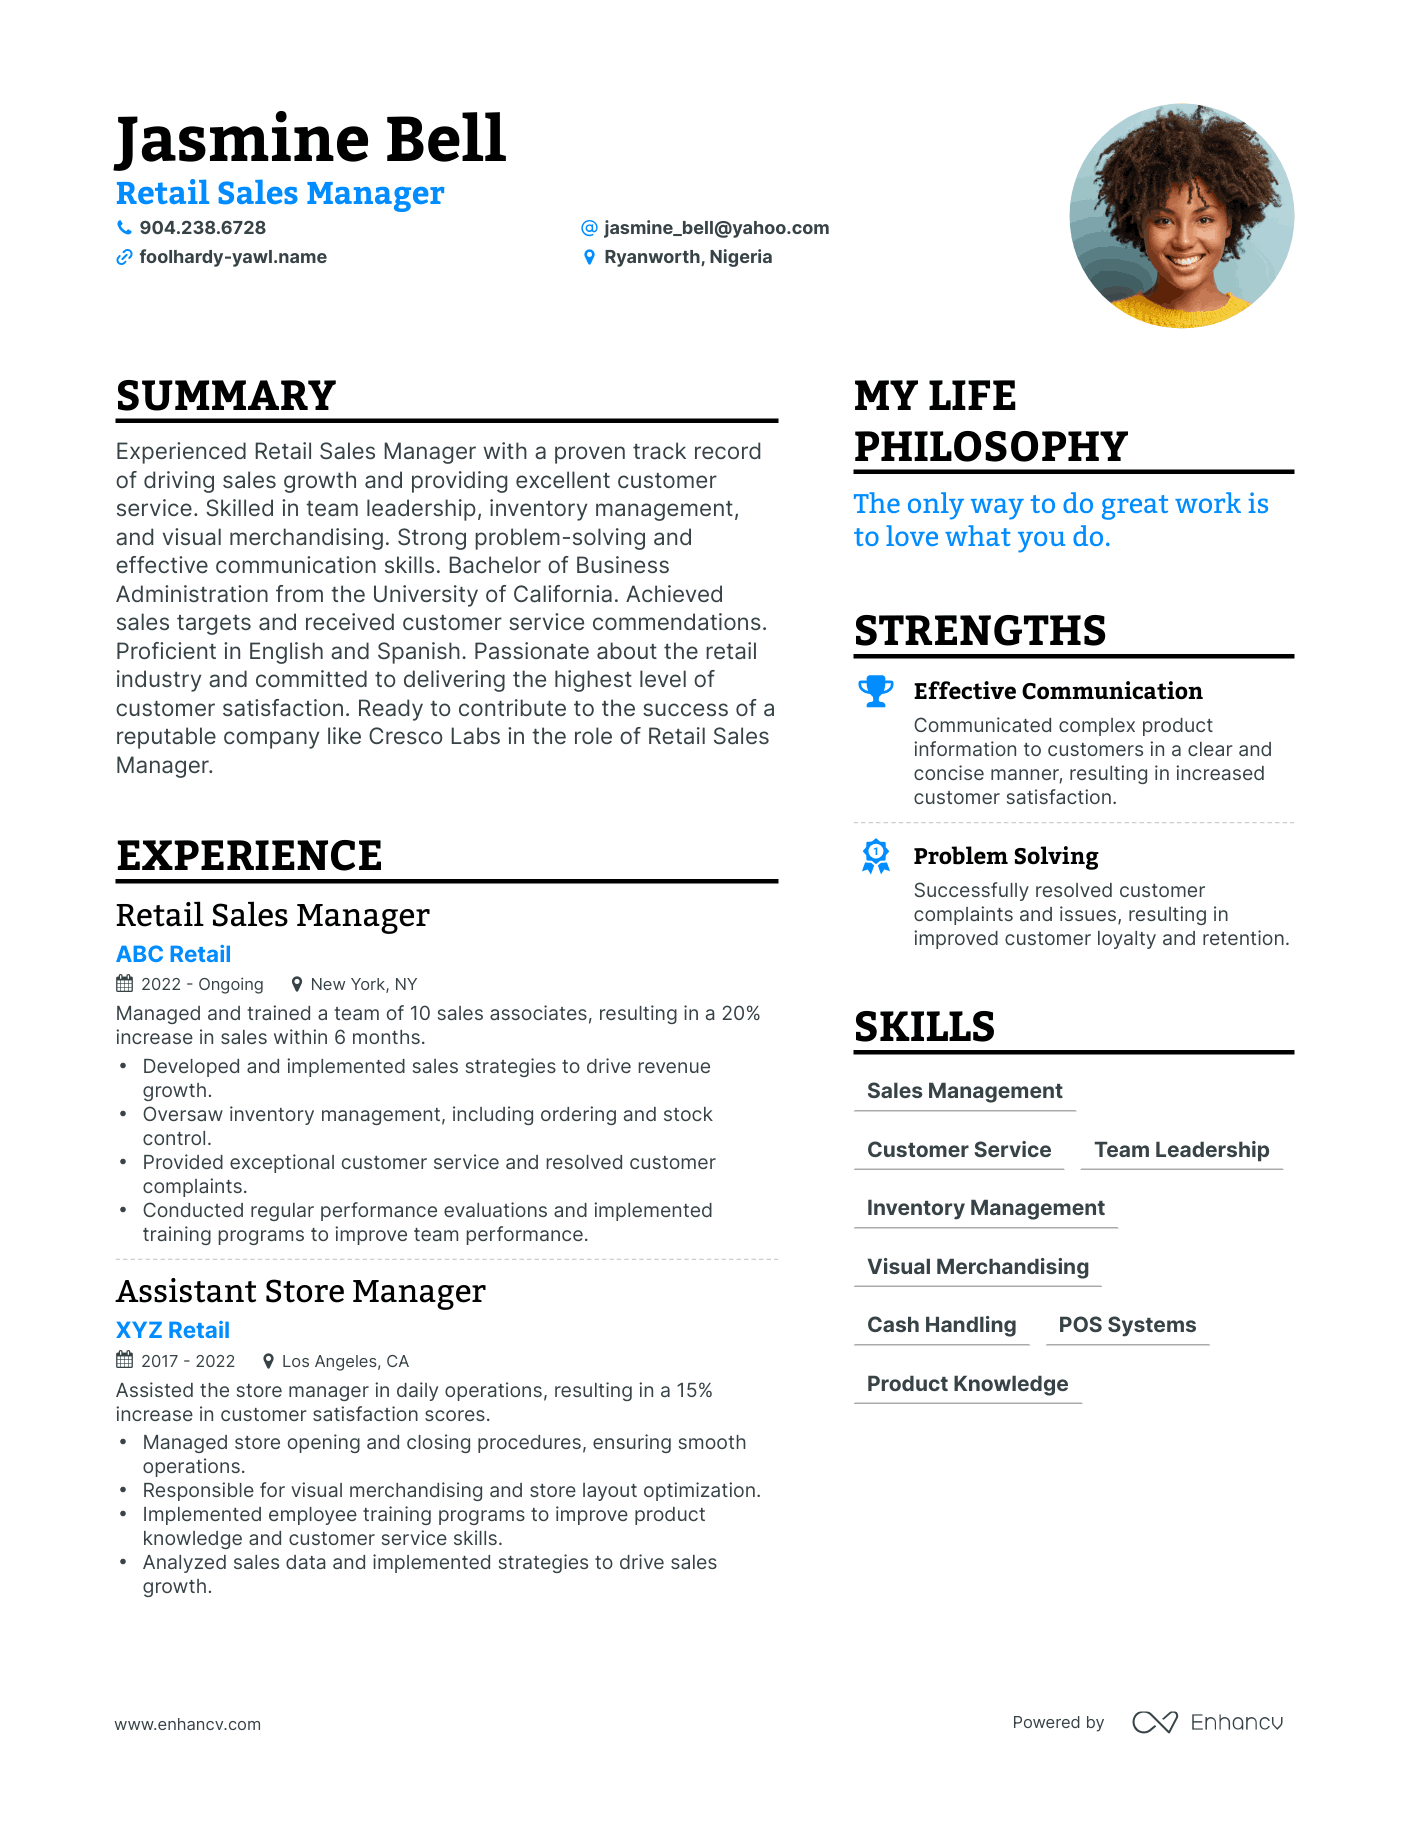 Retail Sales Manager resume example